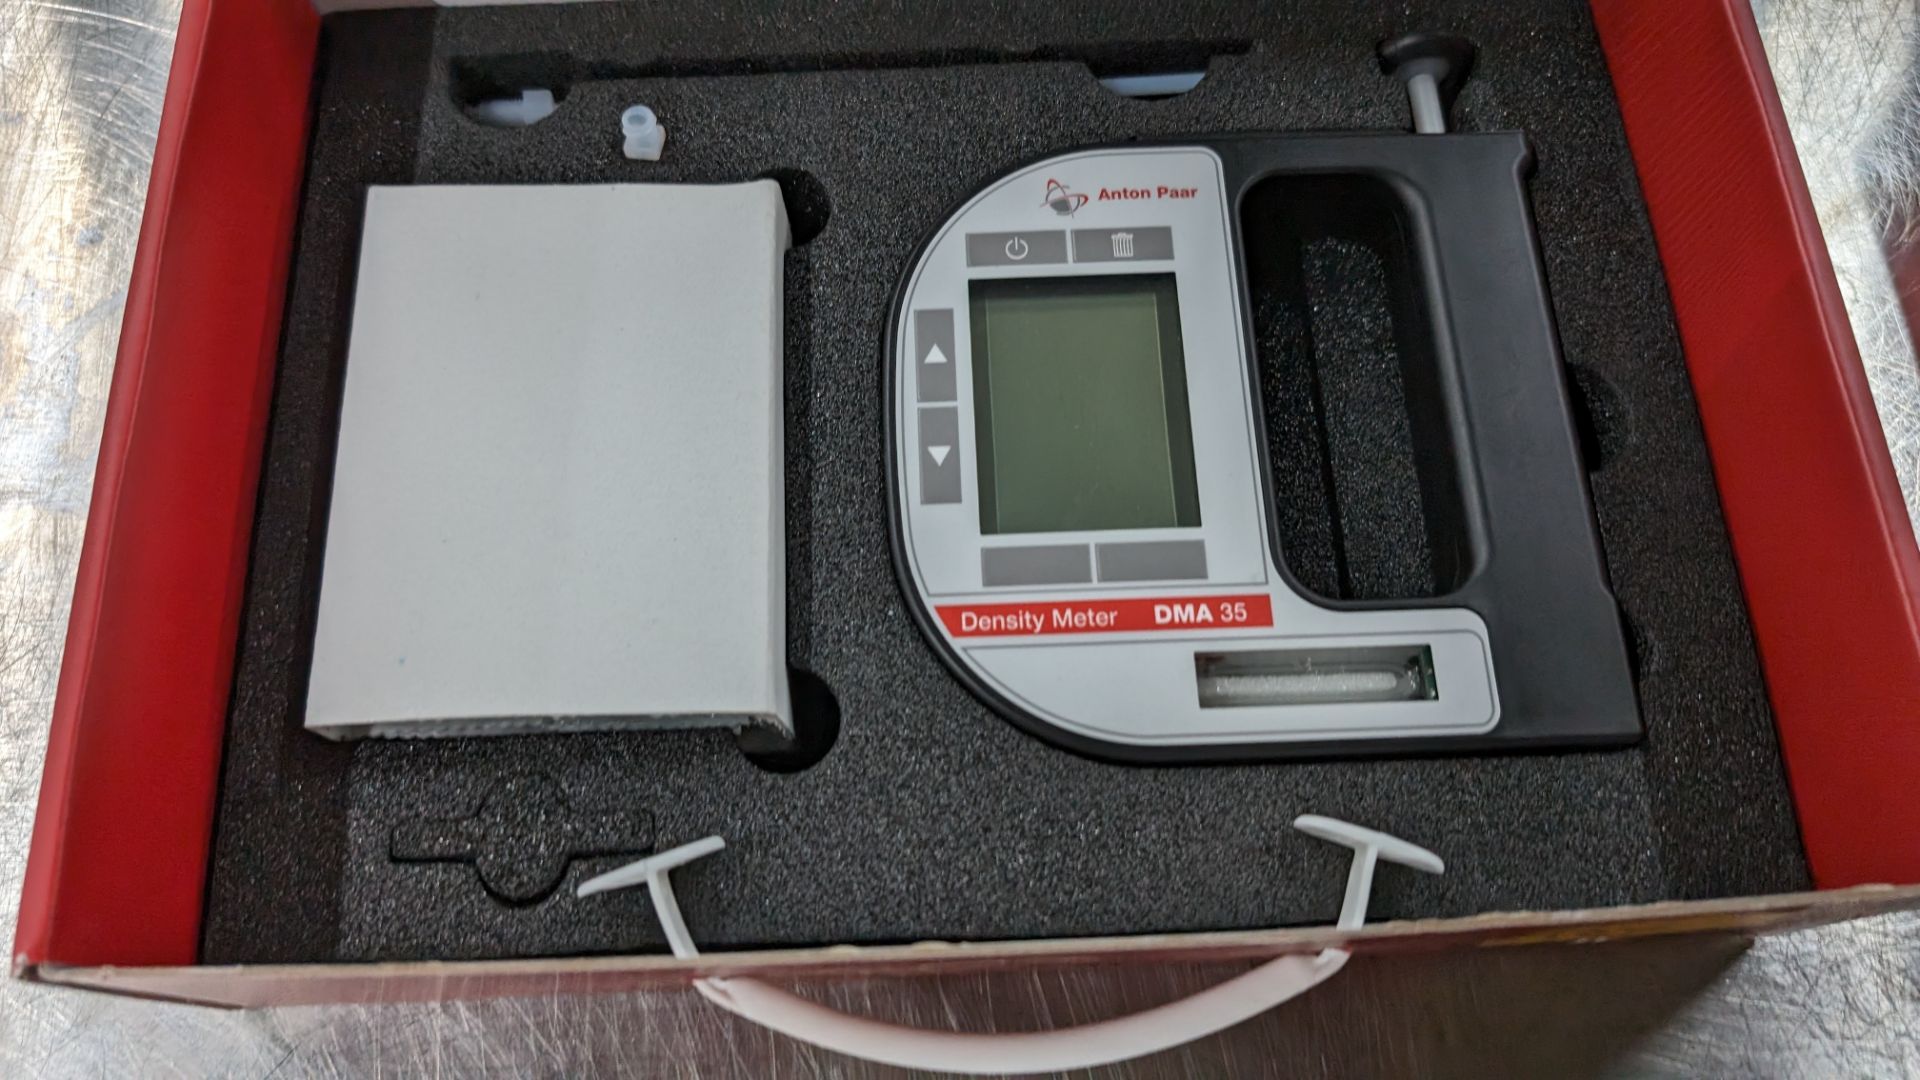 Anton Paar density meter, model DMA 35, including box, consumables and book pack - Image 3 of 8